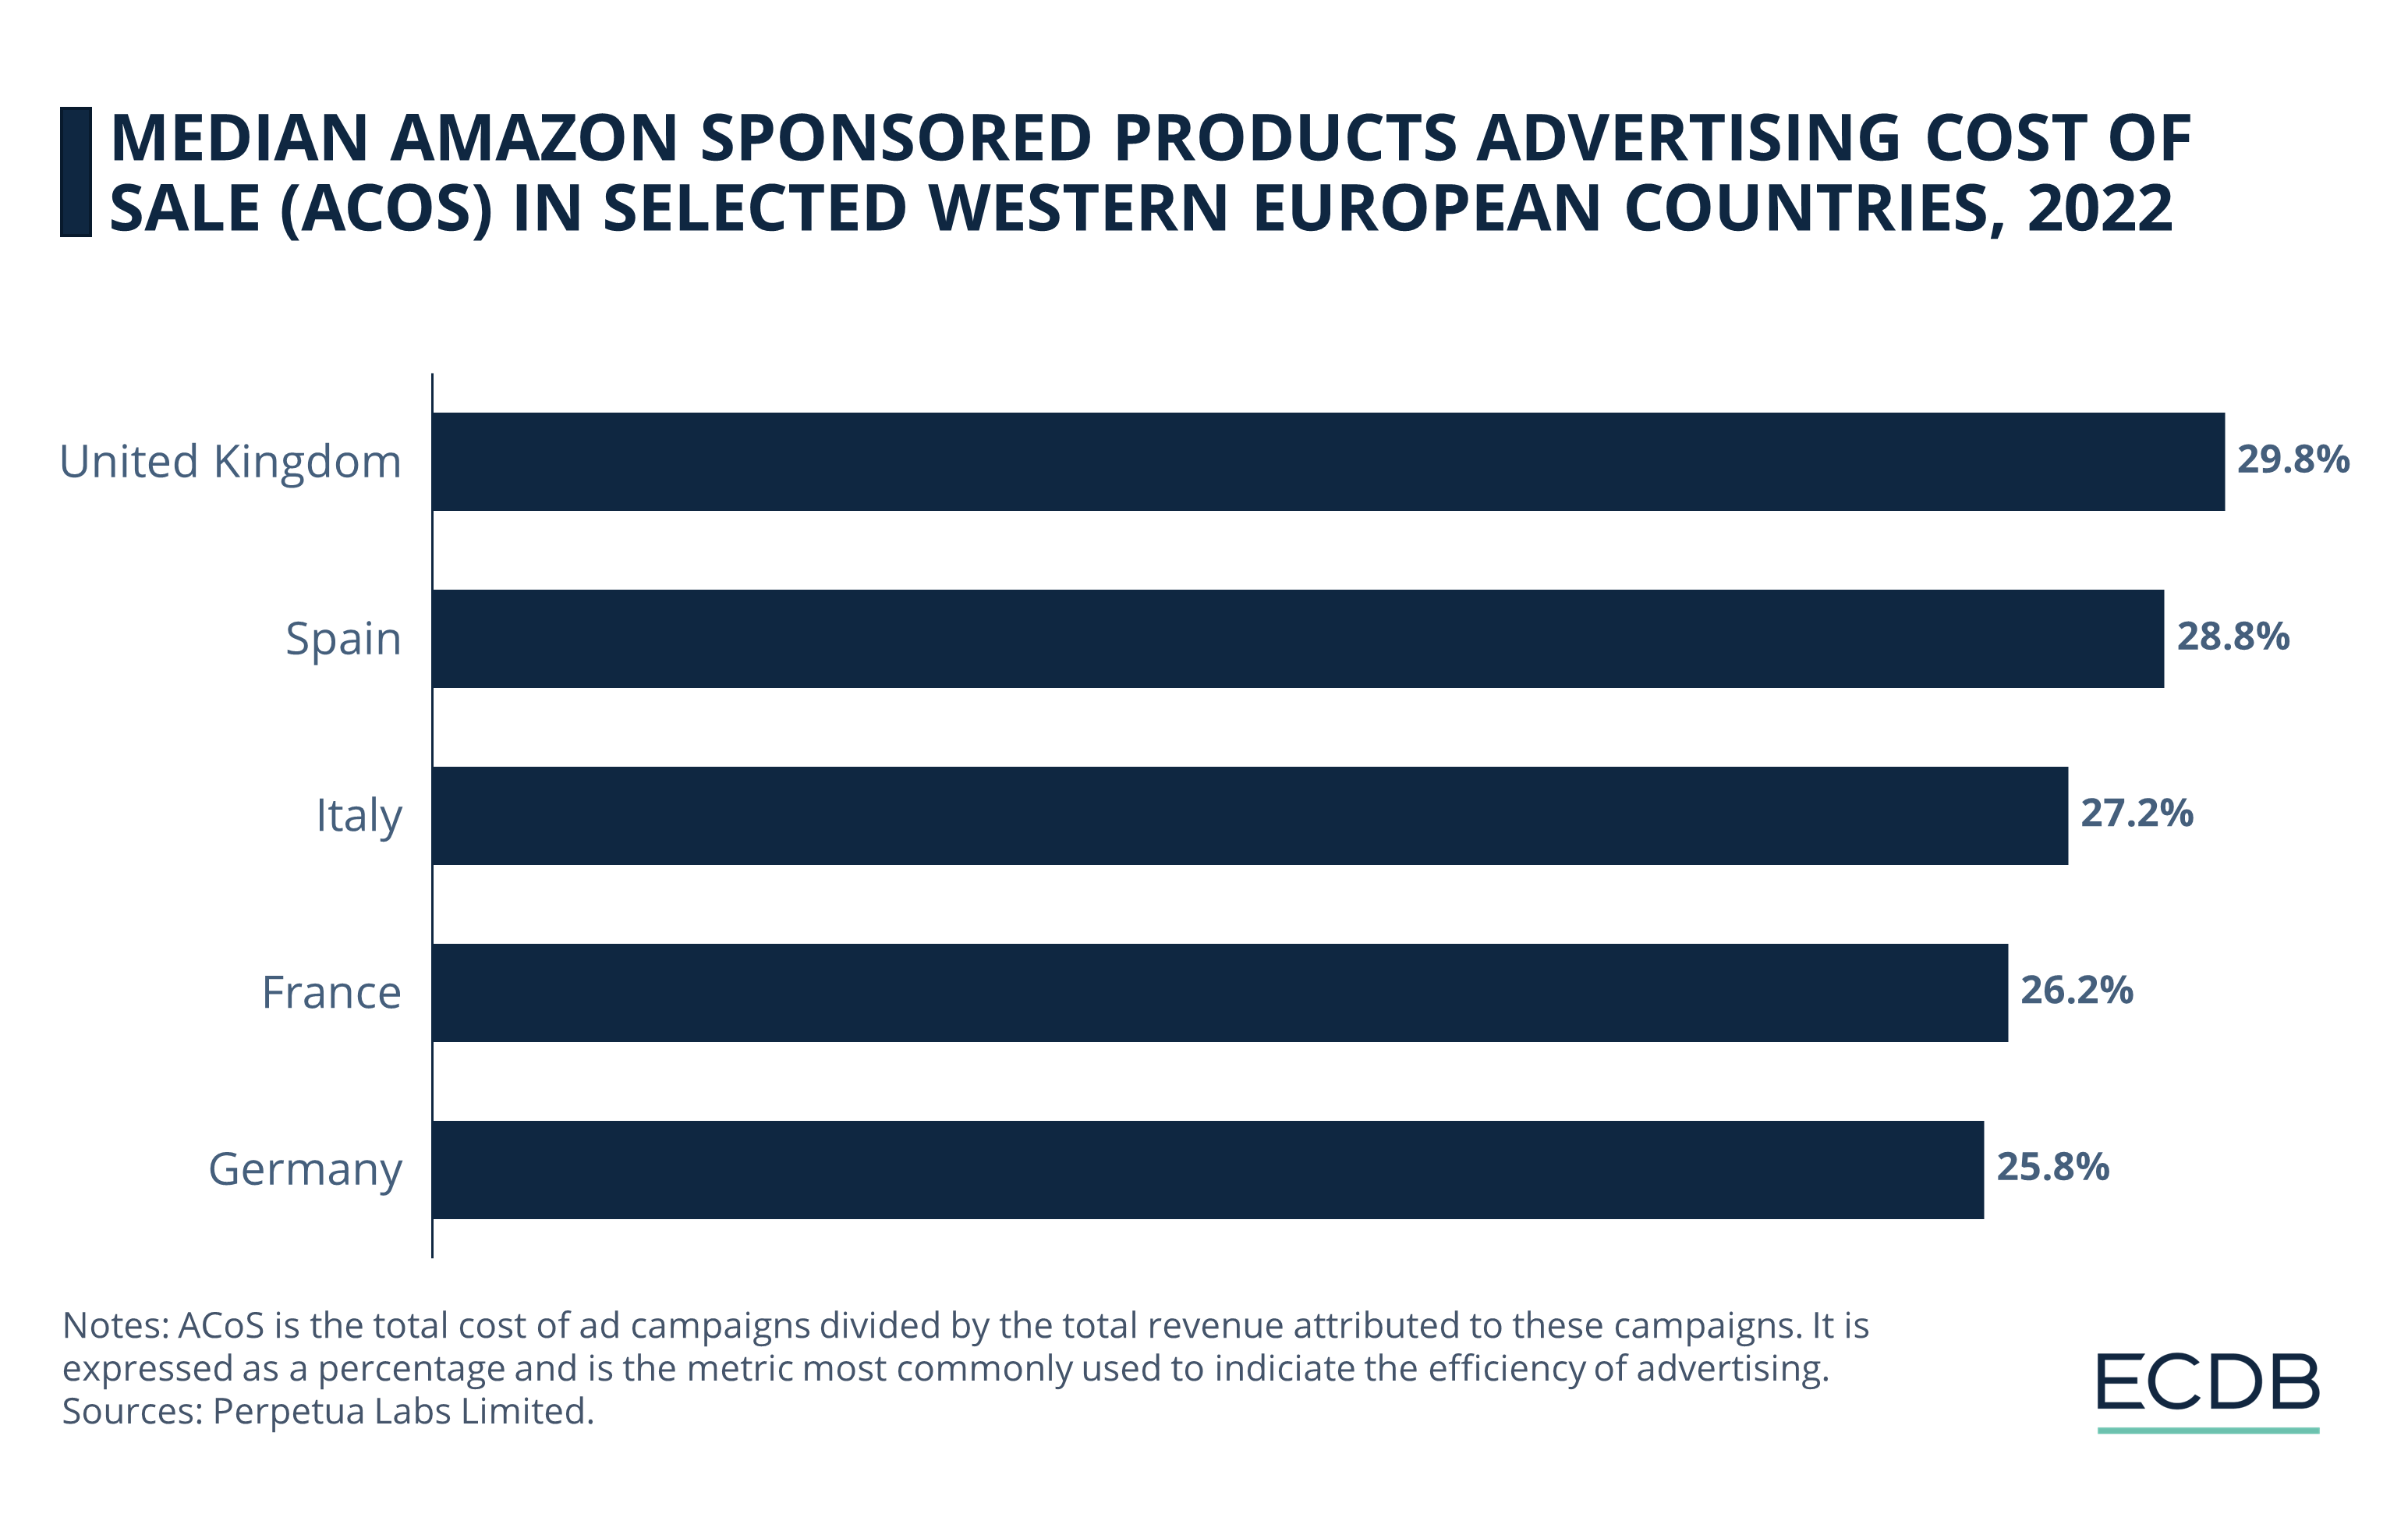 Amazon Median Sponsored Products ACoS in Selected Western European Countries